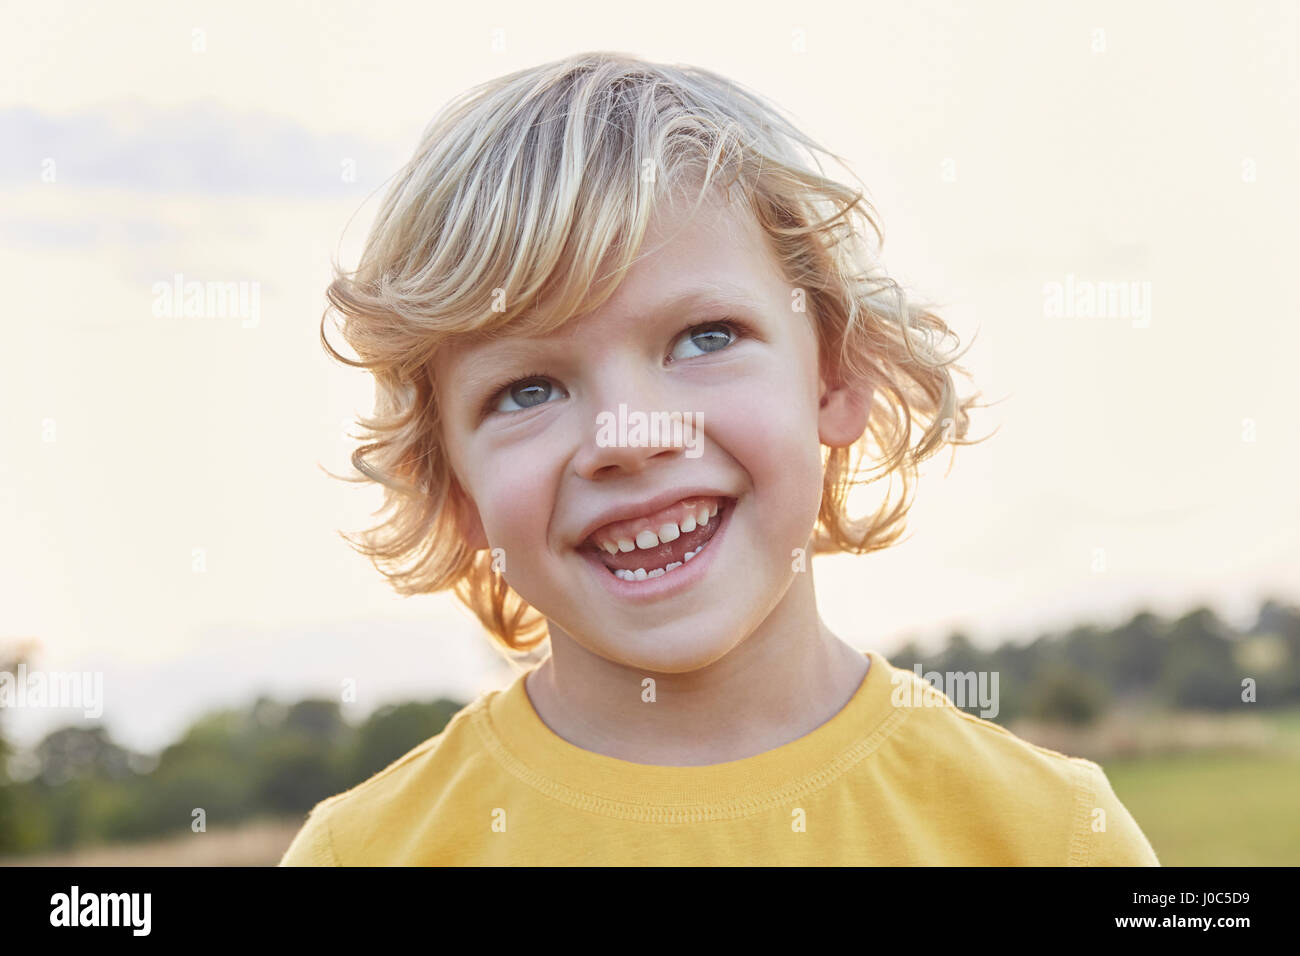 Portrait Of Blond Haired Blue Eyed Boy On Playing Field Stock